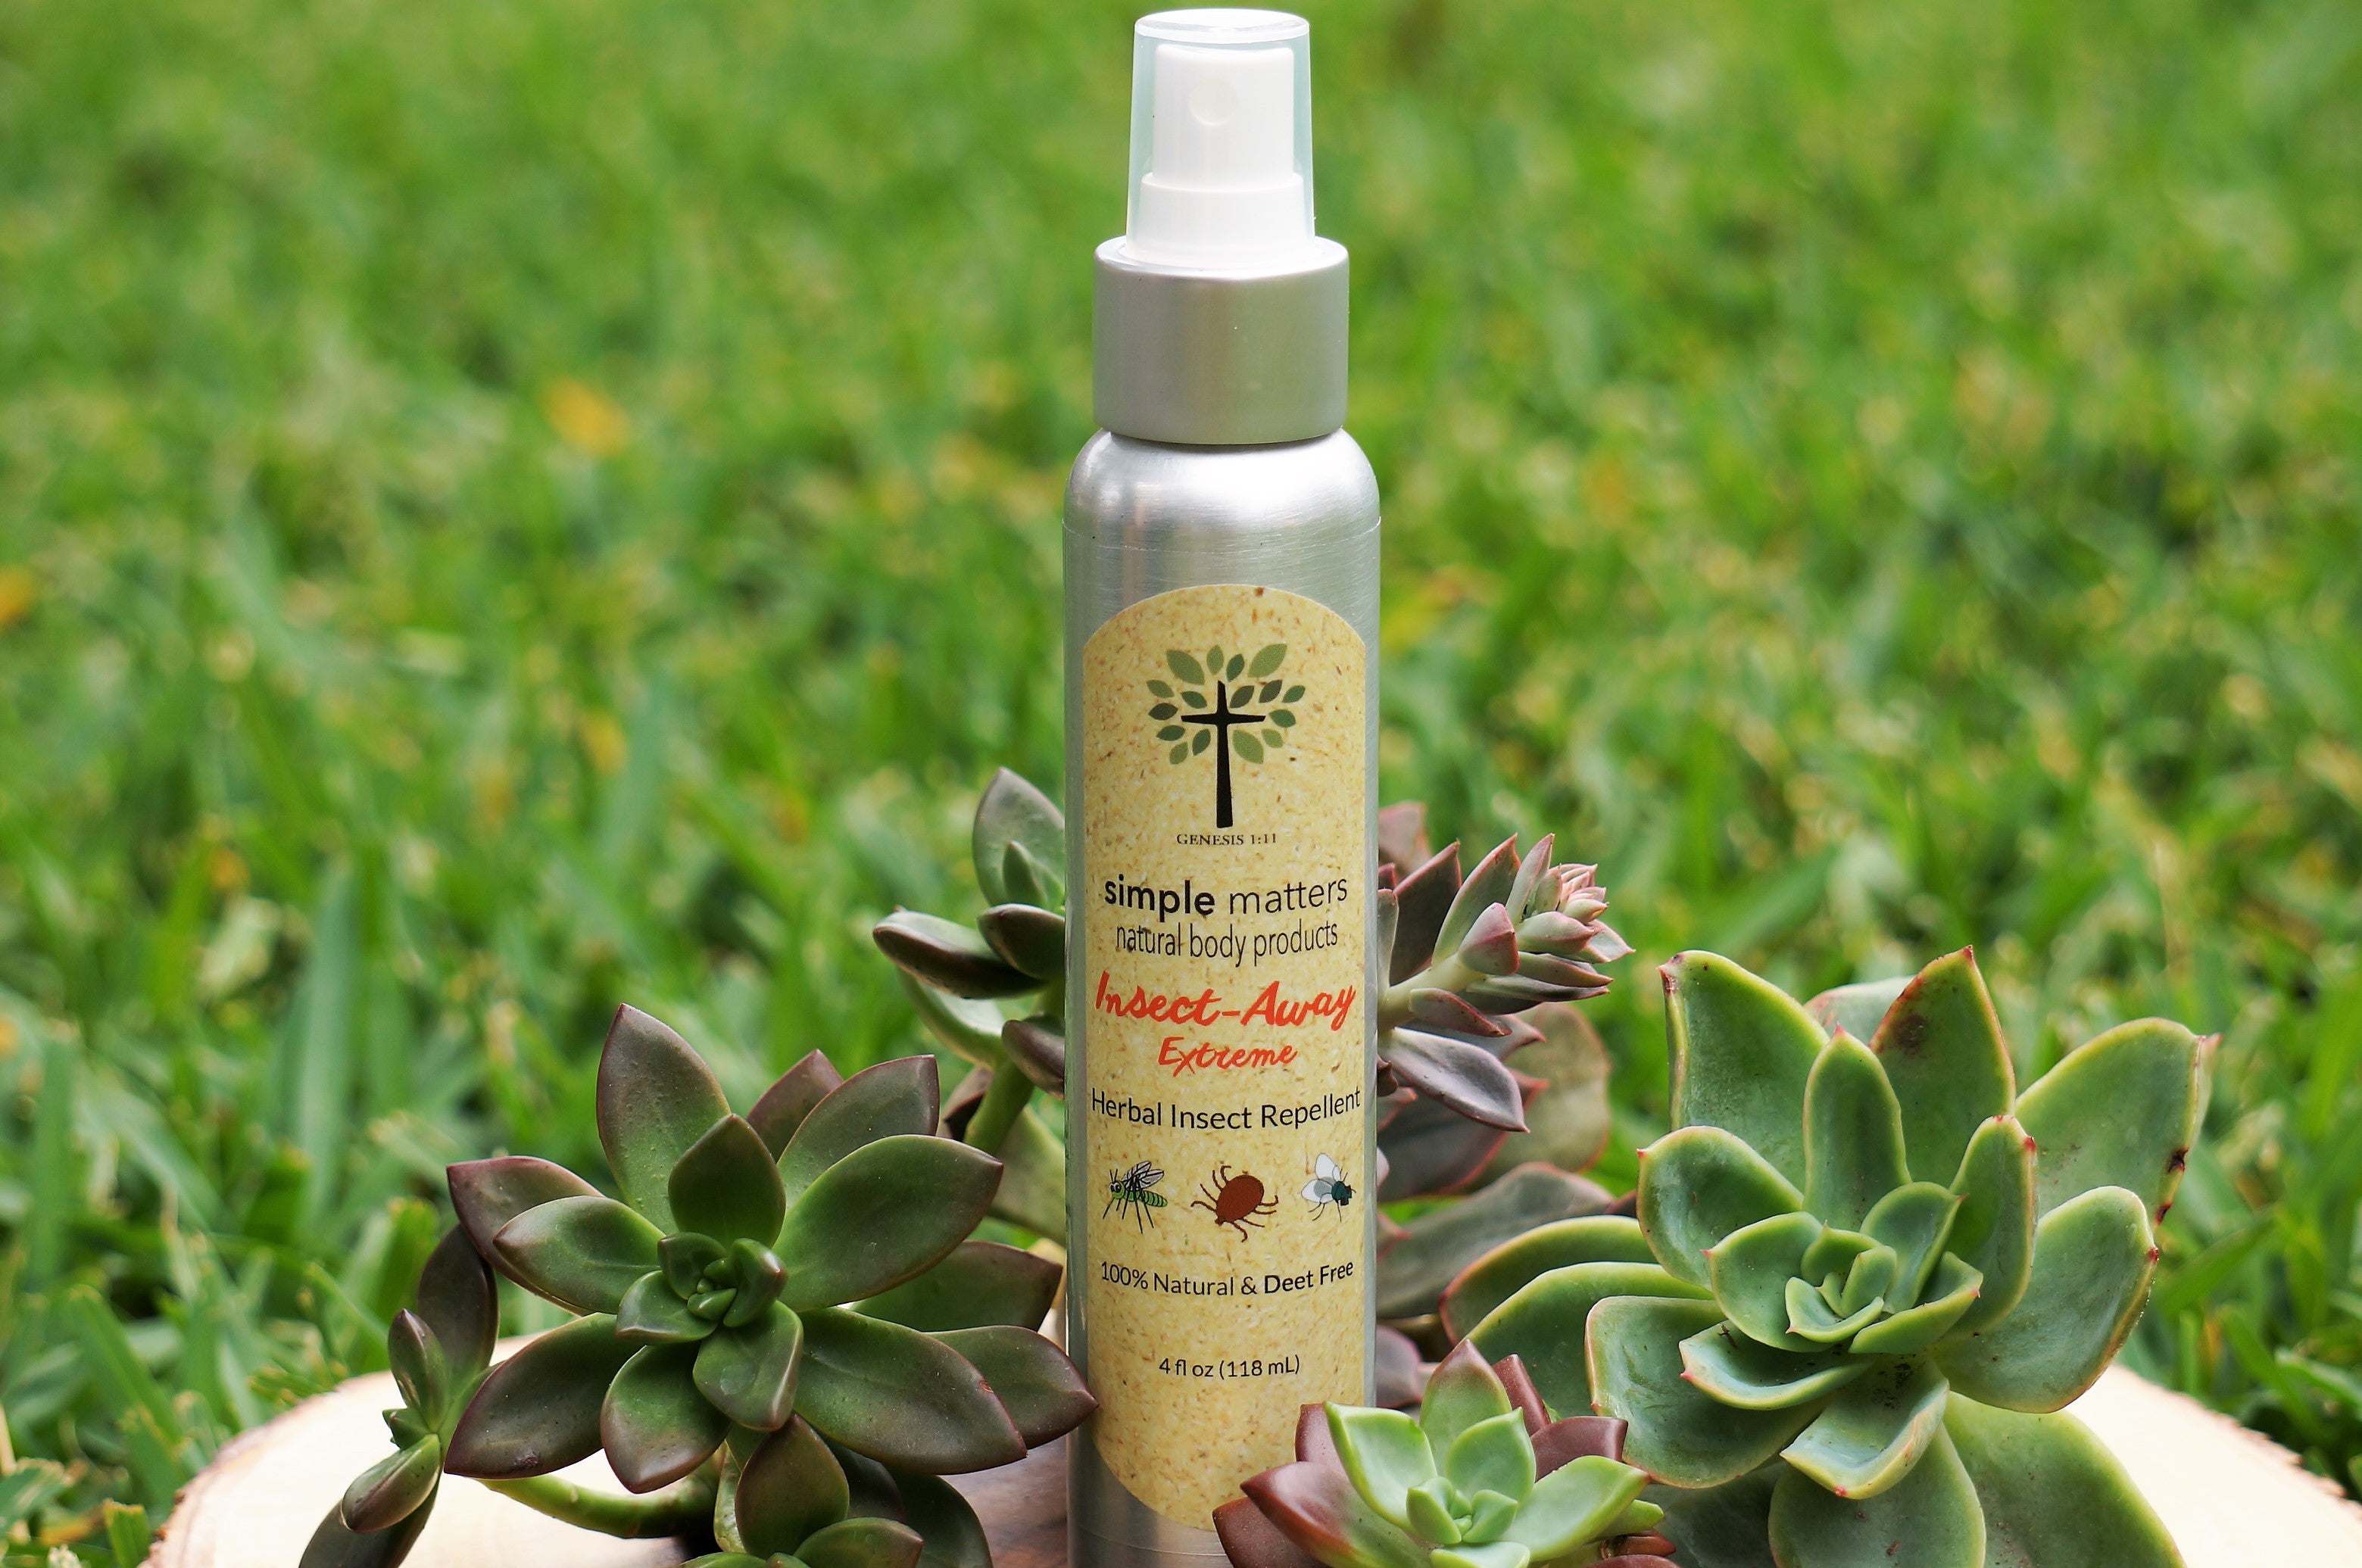 Insect-Away Extreme - Herbal Insect Repellent